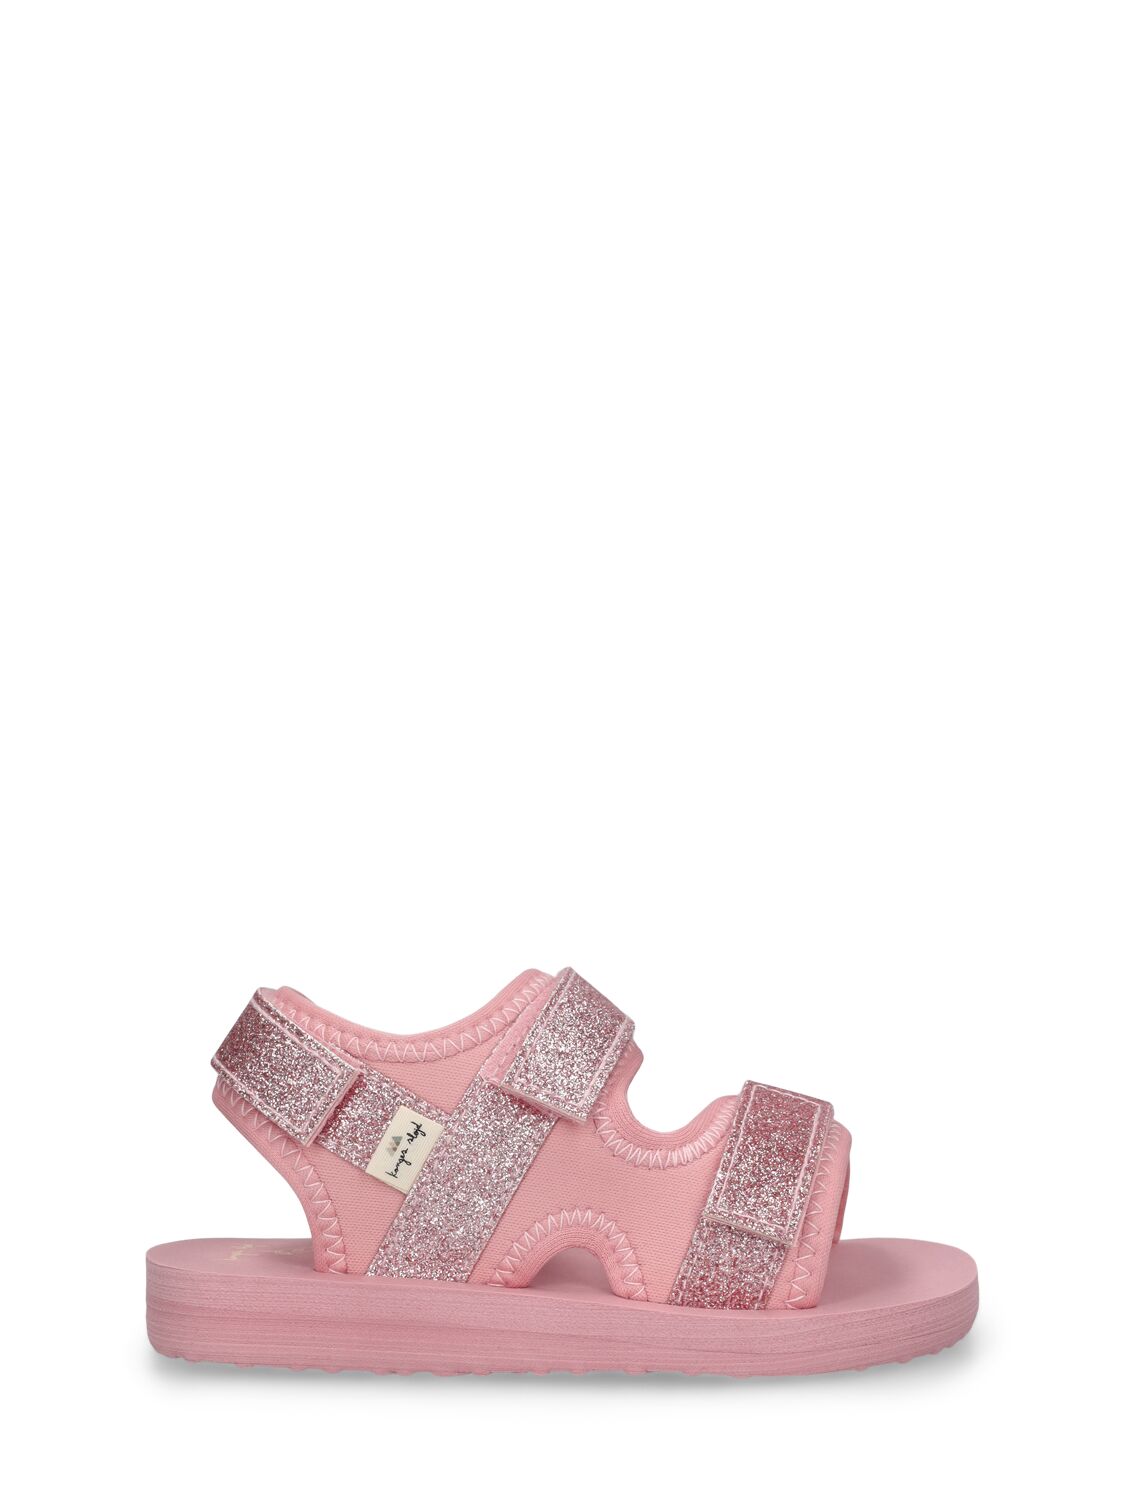 Image of Glittered Rubber Sandals W/straps